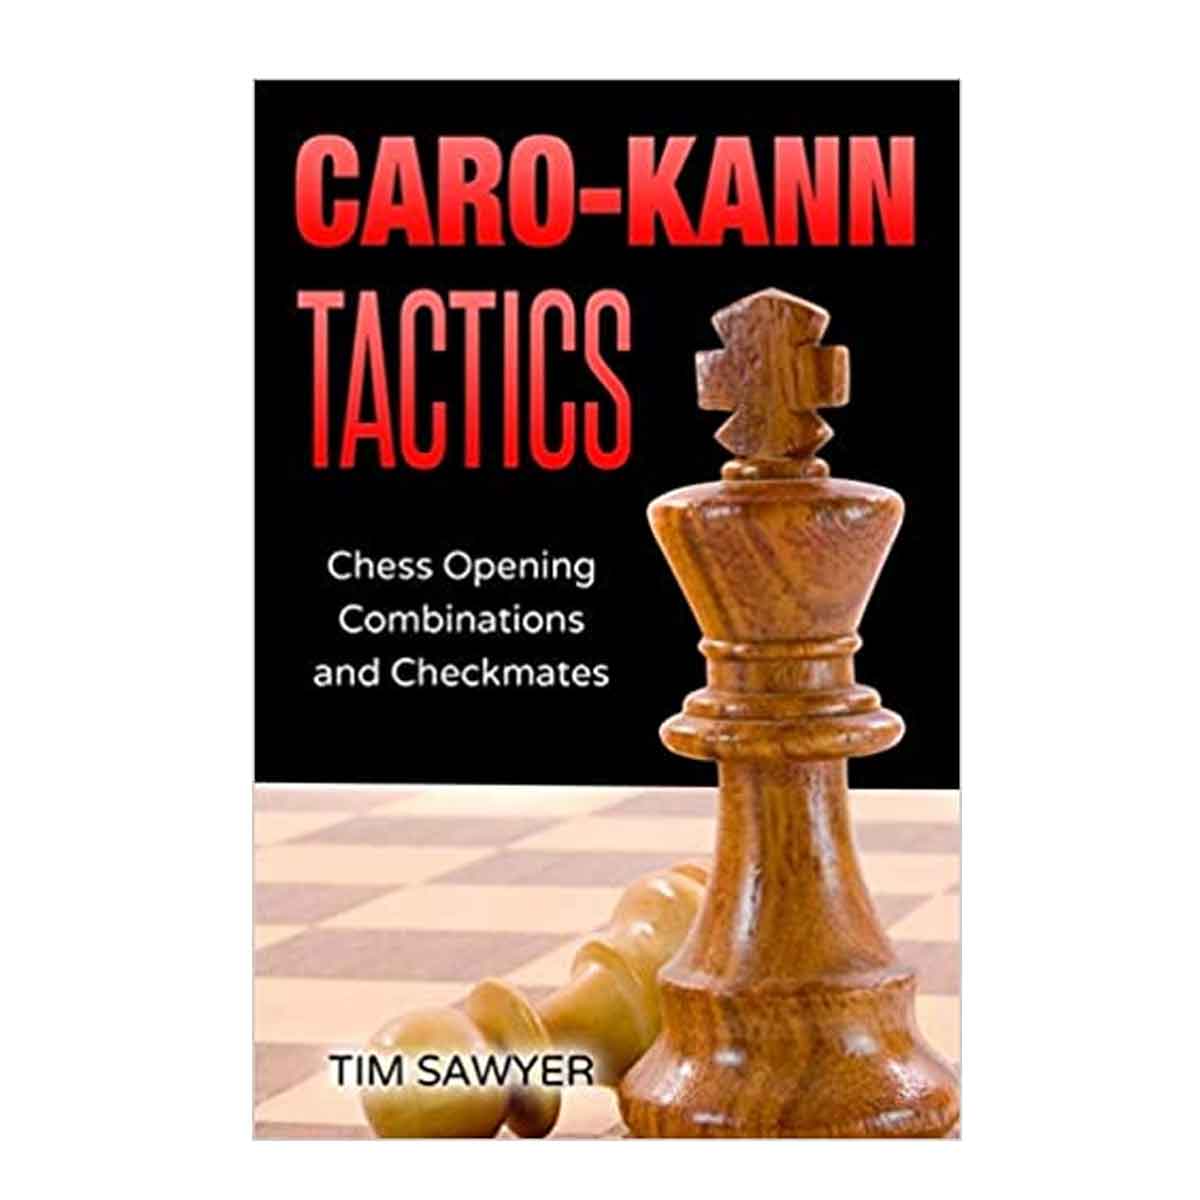 Winning Quickly at Chess: Catastrophes & Tactics in the Chess Opening -  Volume 9 : Caro-Kann & French: Winning in 15 Moves or Less: Chess Tactics,  Brilliancies & Blunders in the Chess